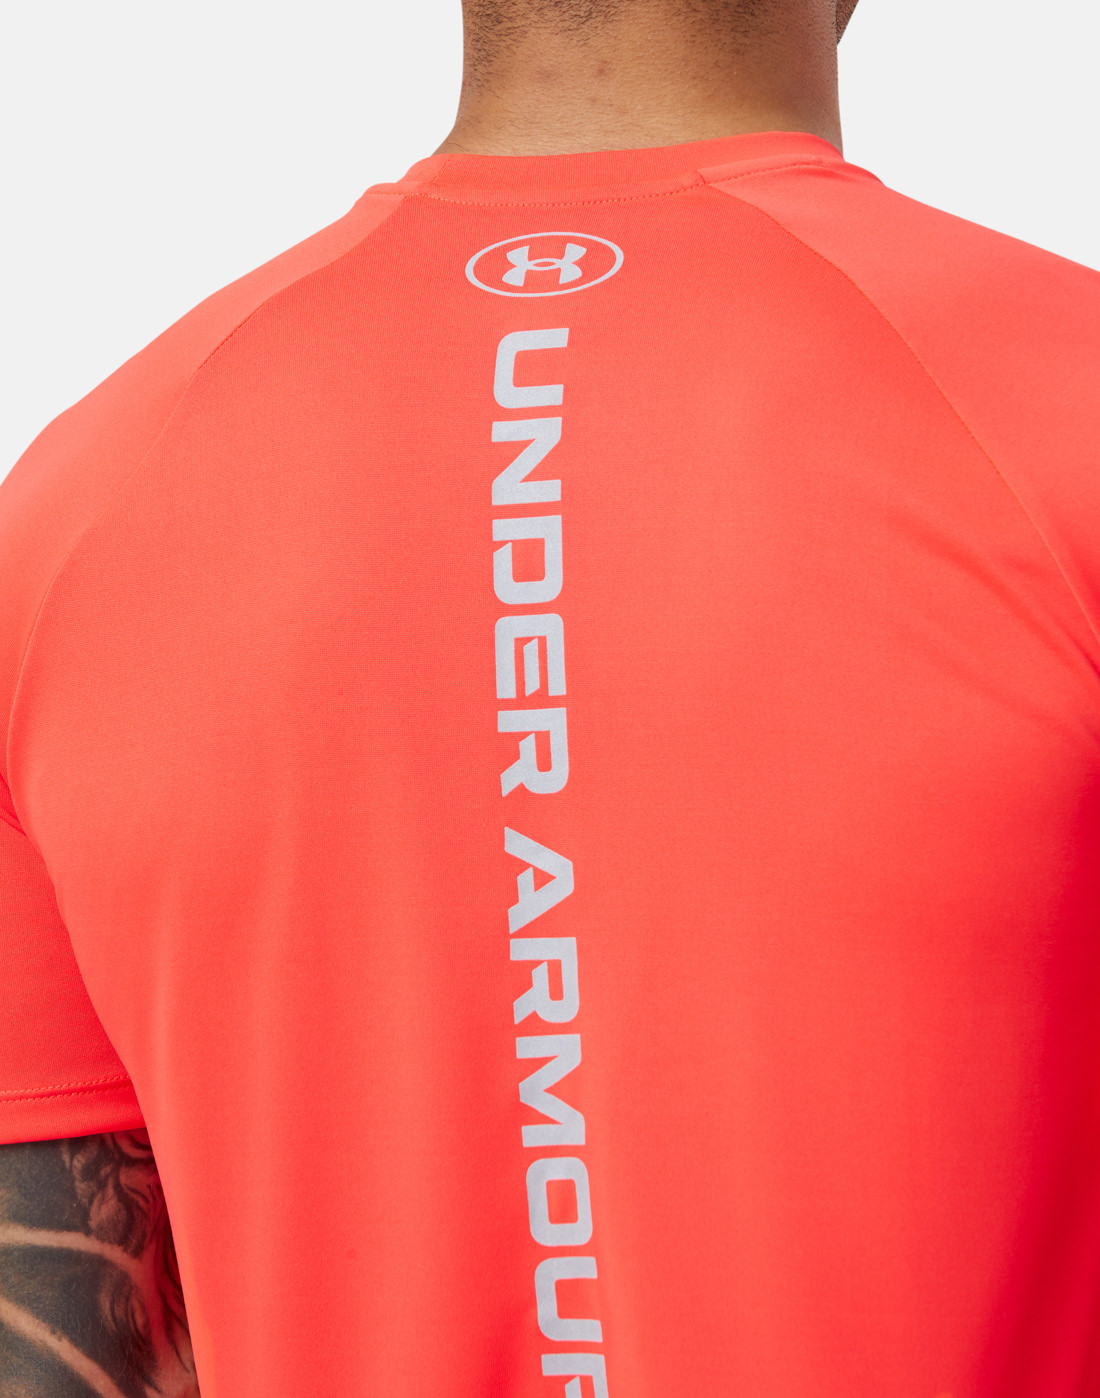 Under Armour Mens Reflective Tech T-Shirt - Red | Life Style Sports IE